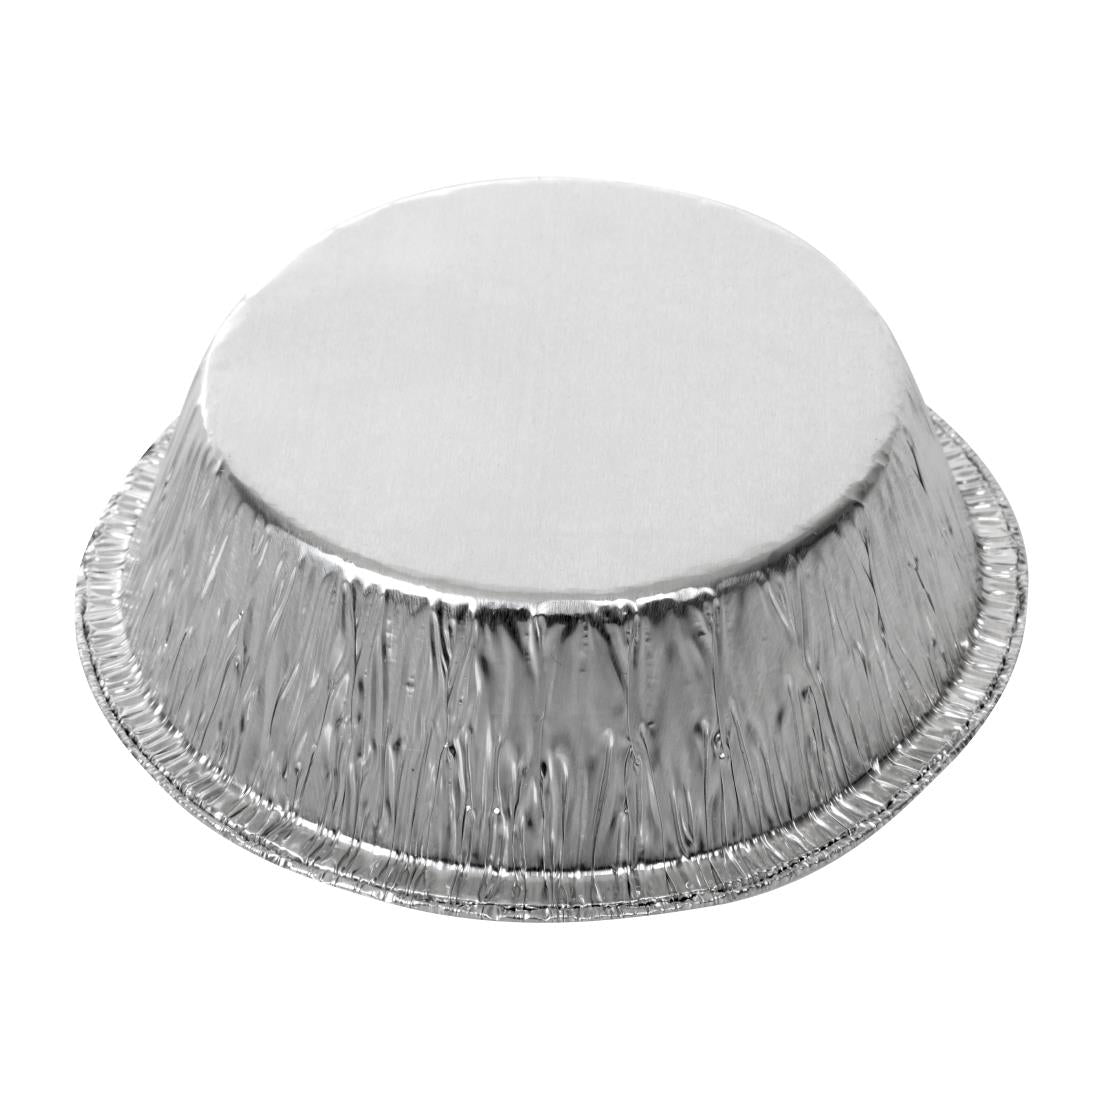 Foil Pie Tins (Pack of 250) JD Catering Equipment Solutions Ltd